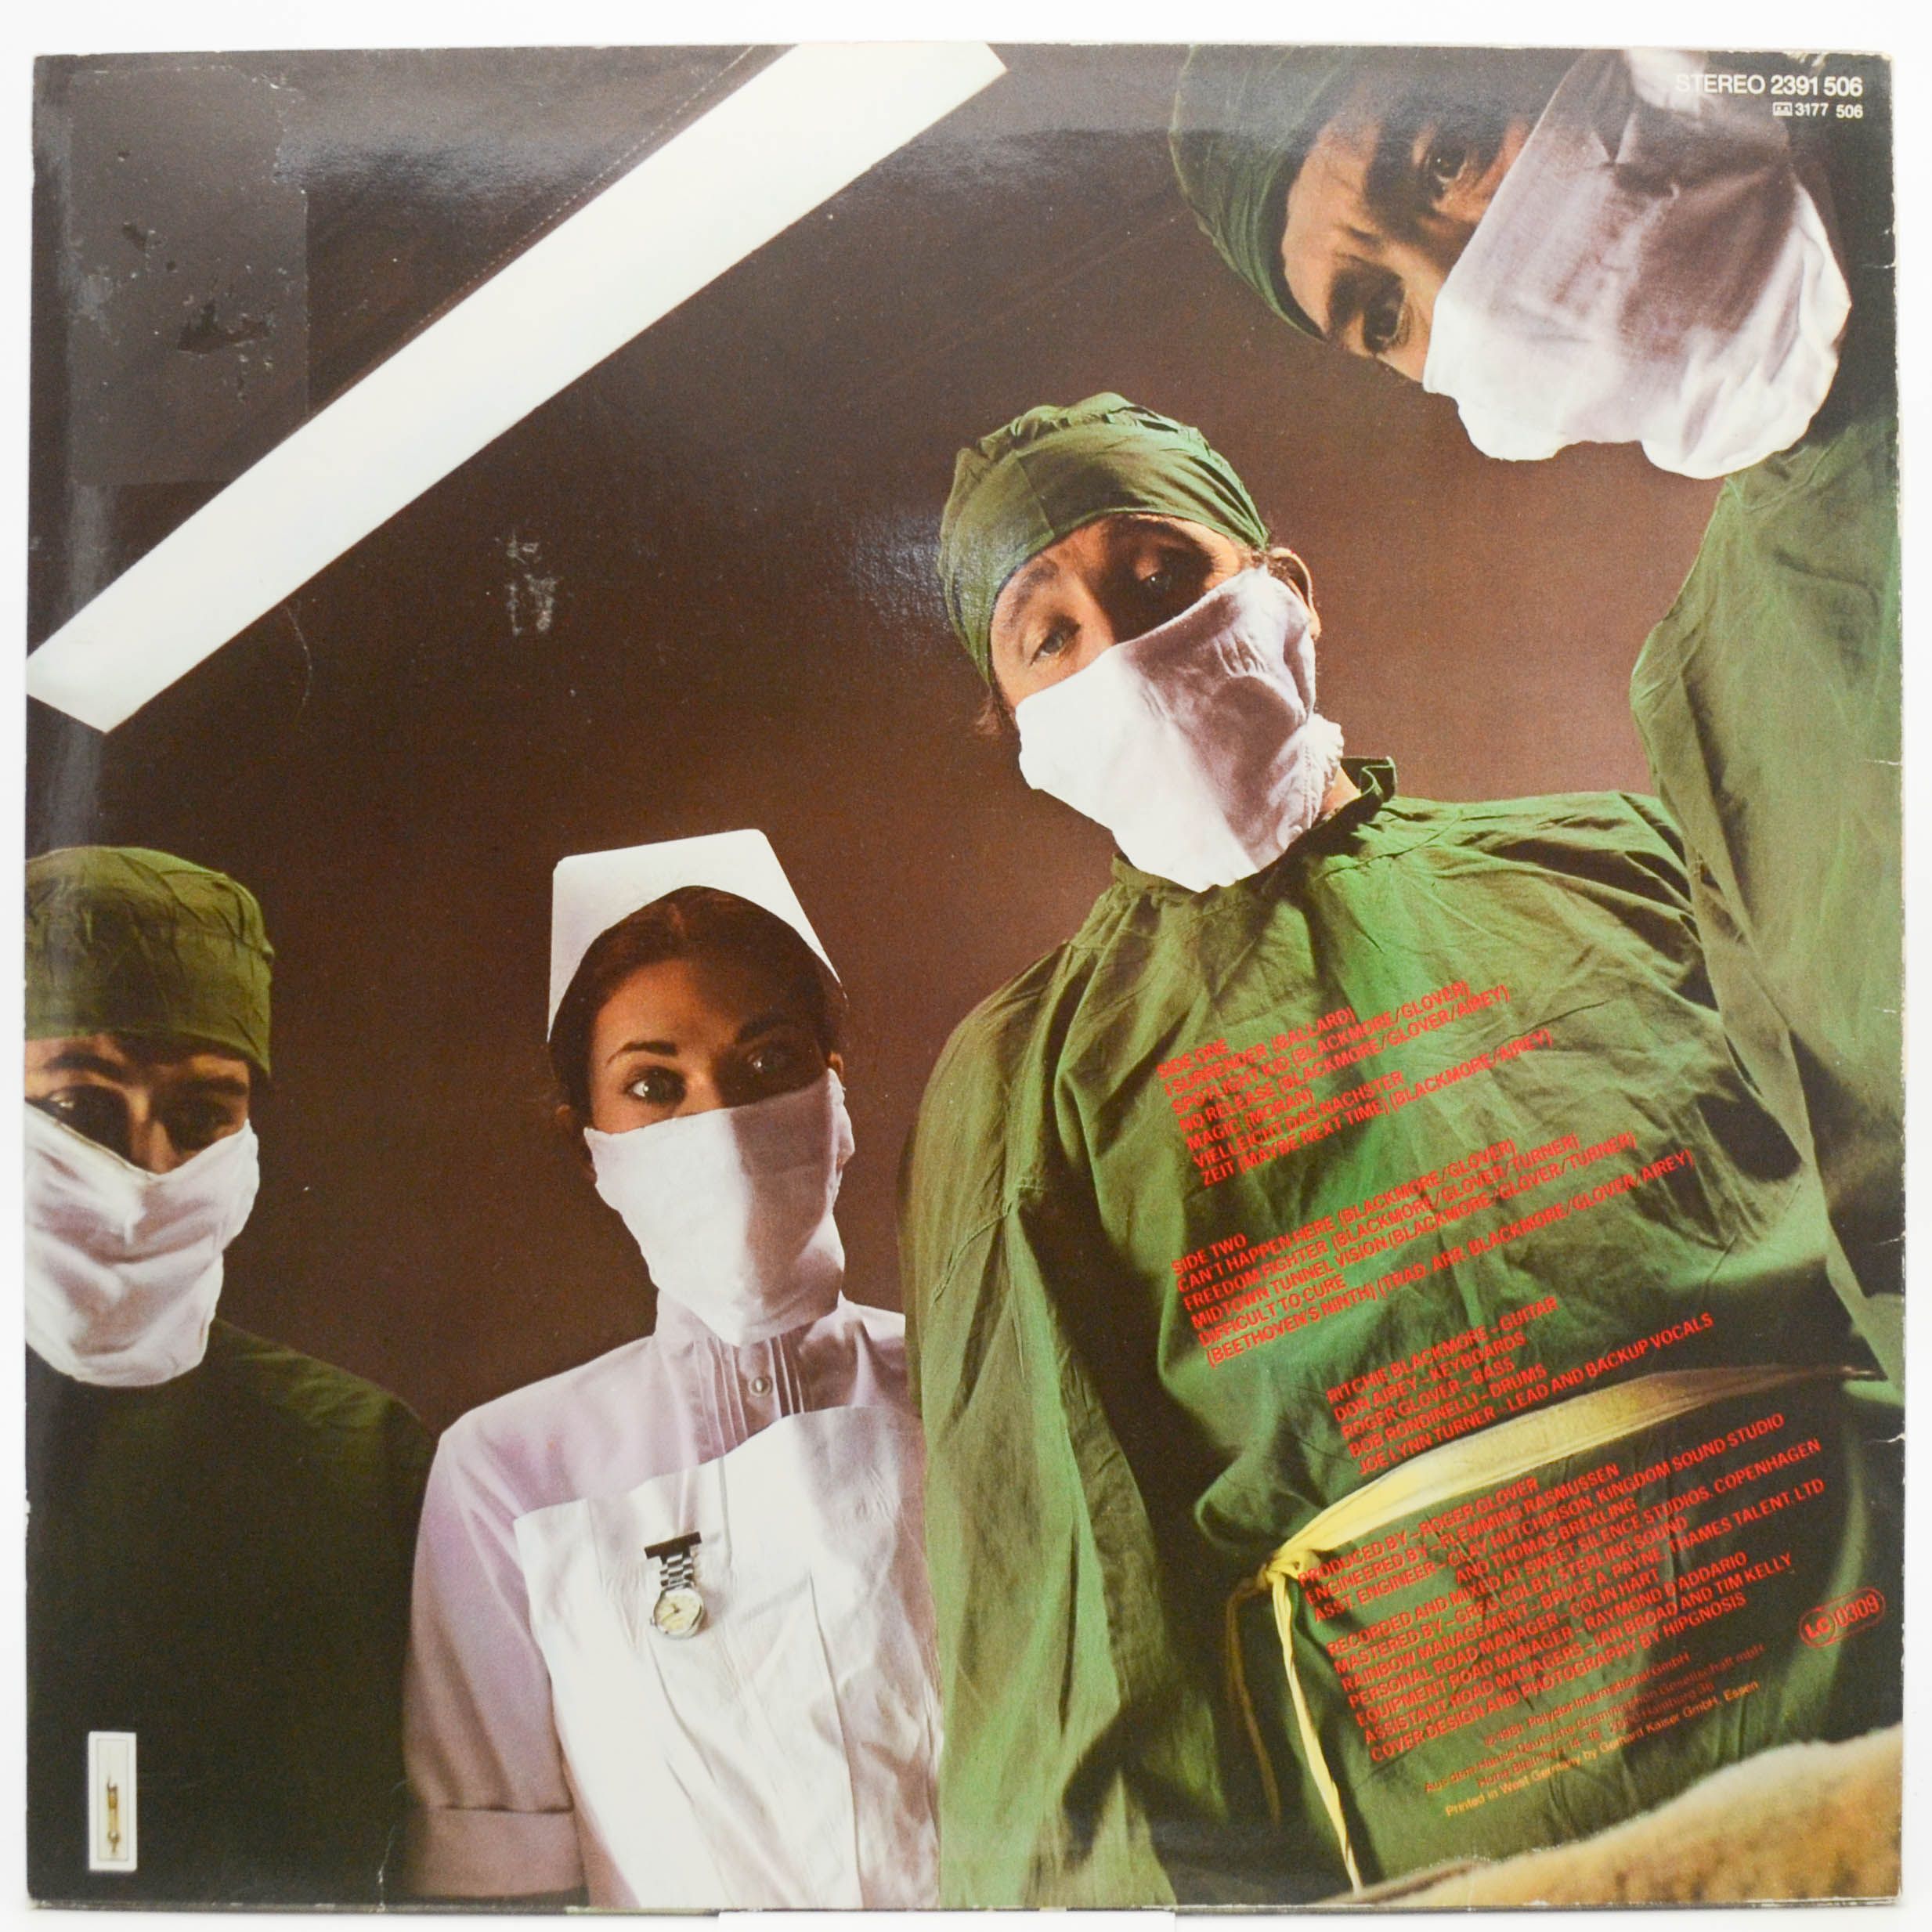 Rainbow — Difficult To Cure, 1981